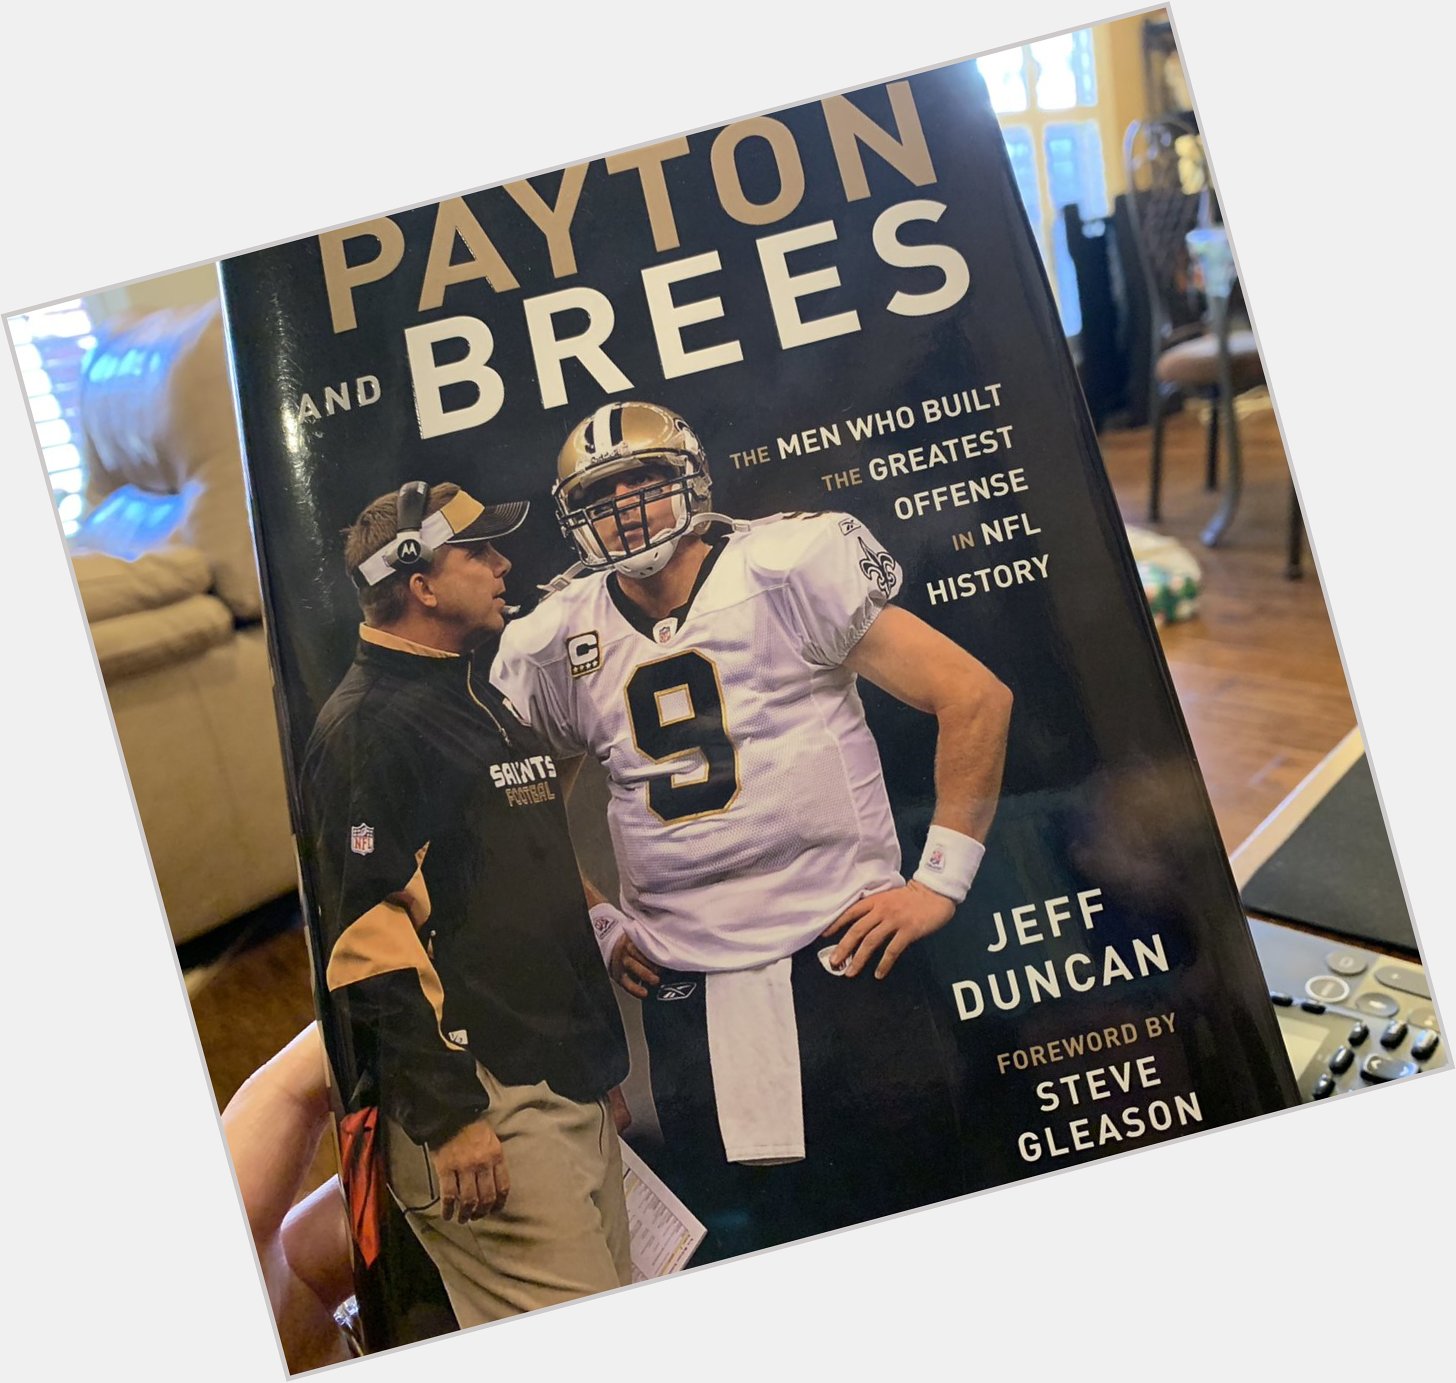 Wishing Sean Payton a happy birthday today and diving into one of my favorite Christmas gifts! 